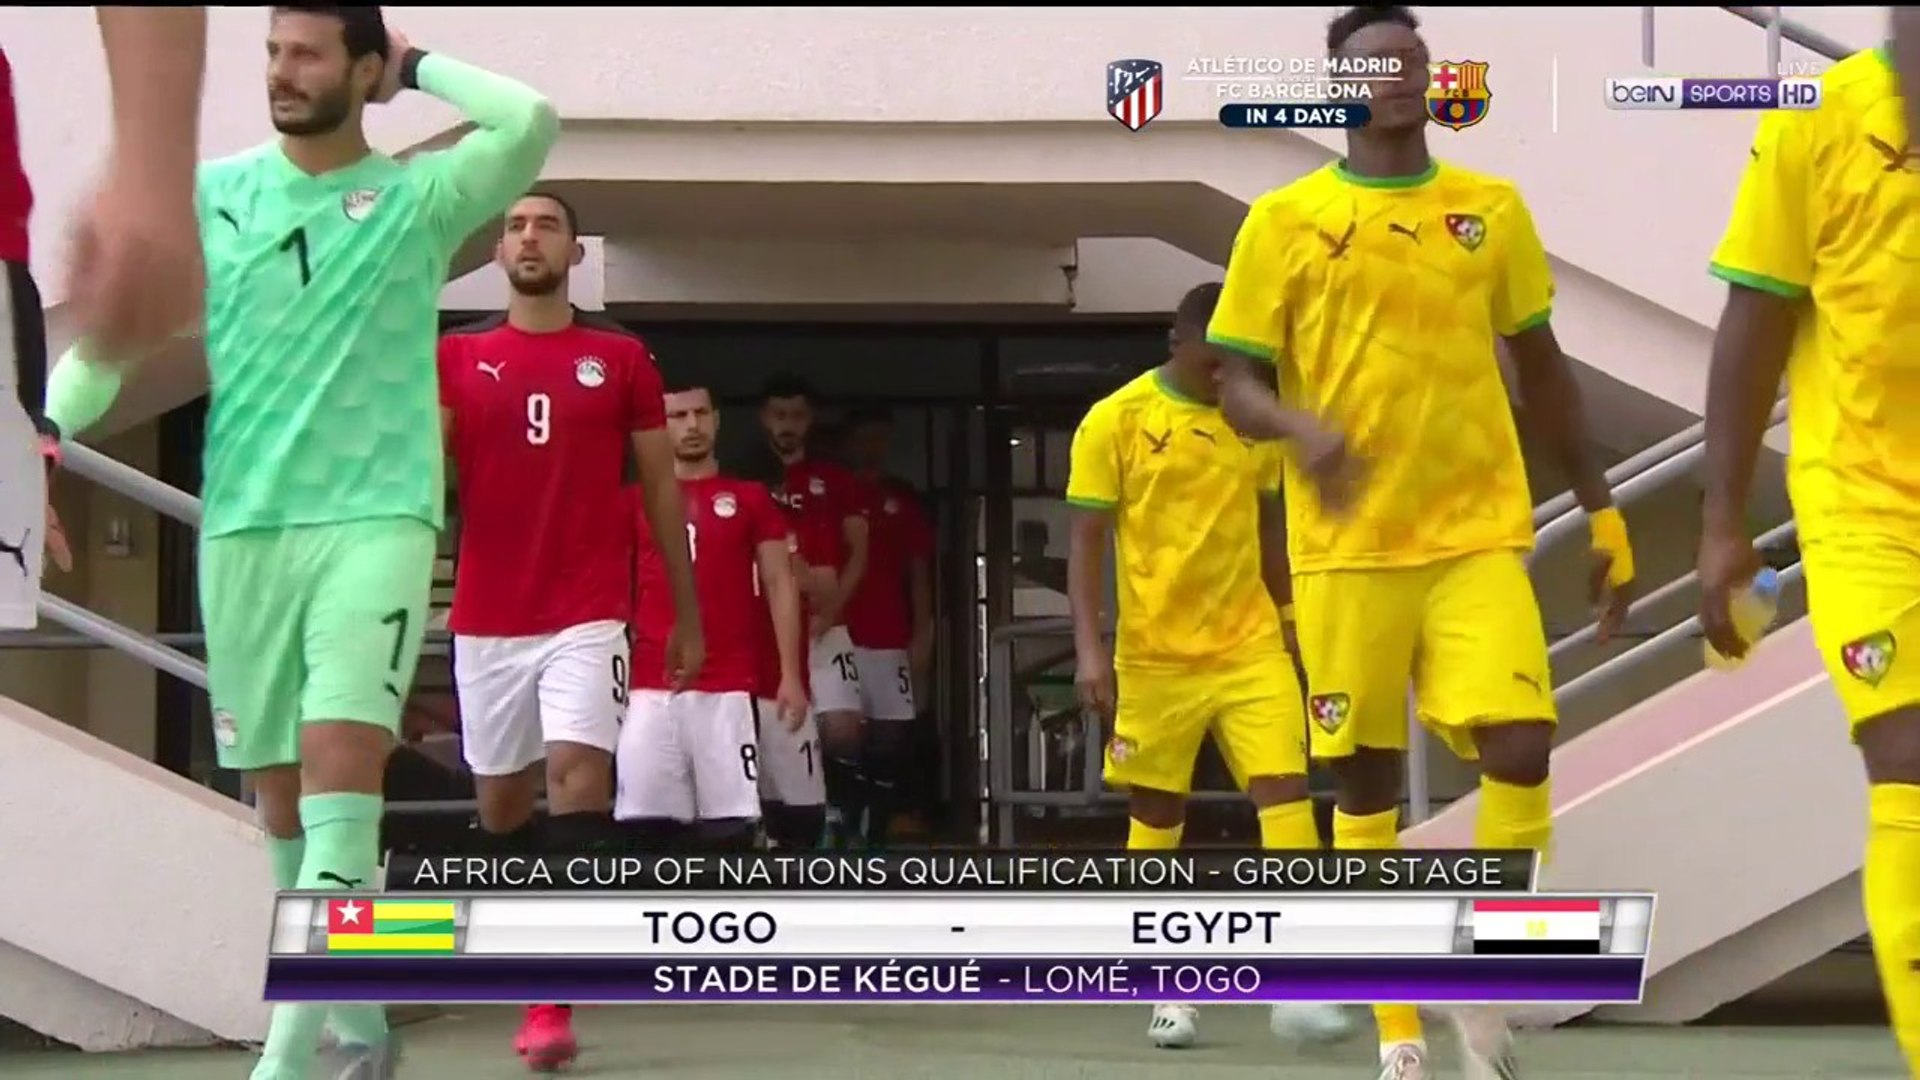 Togo vs Egypt - Watch LIVE on beIN SPORTS - video Dailymotion